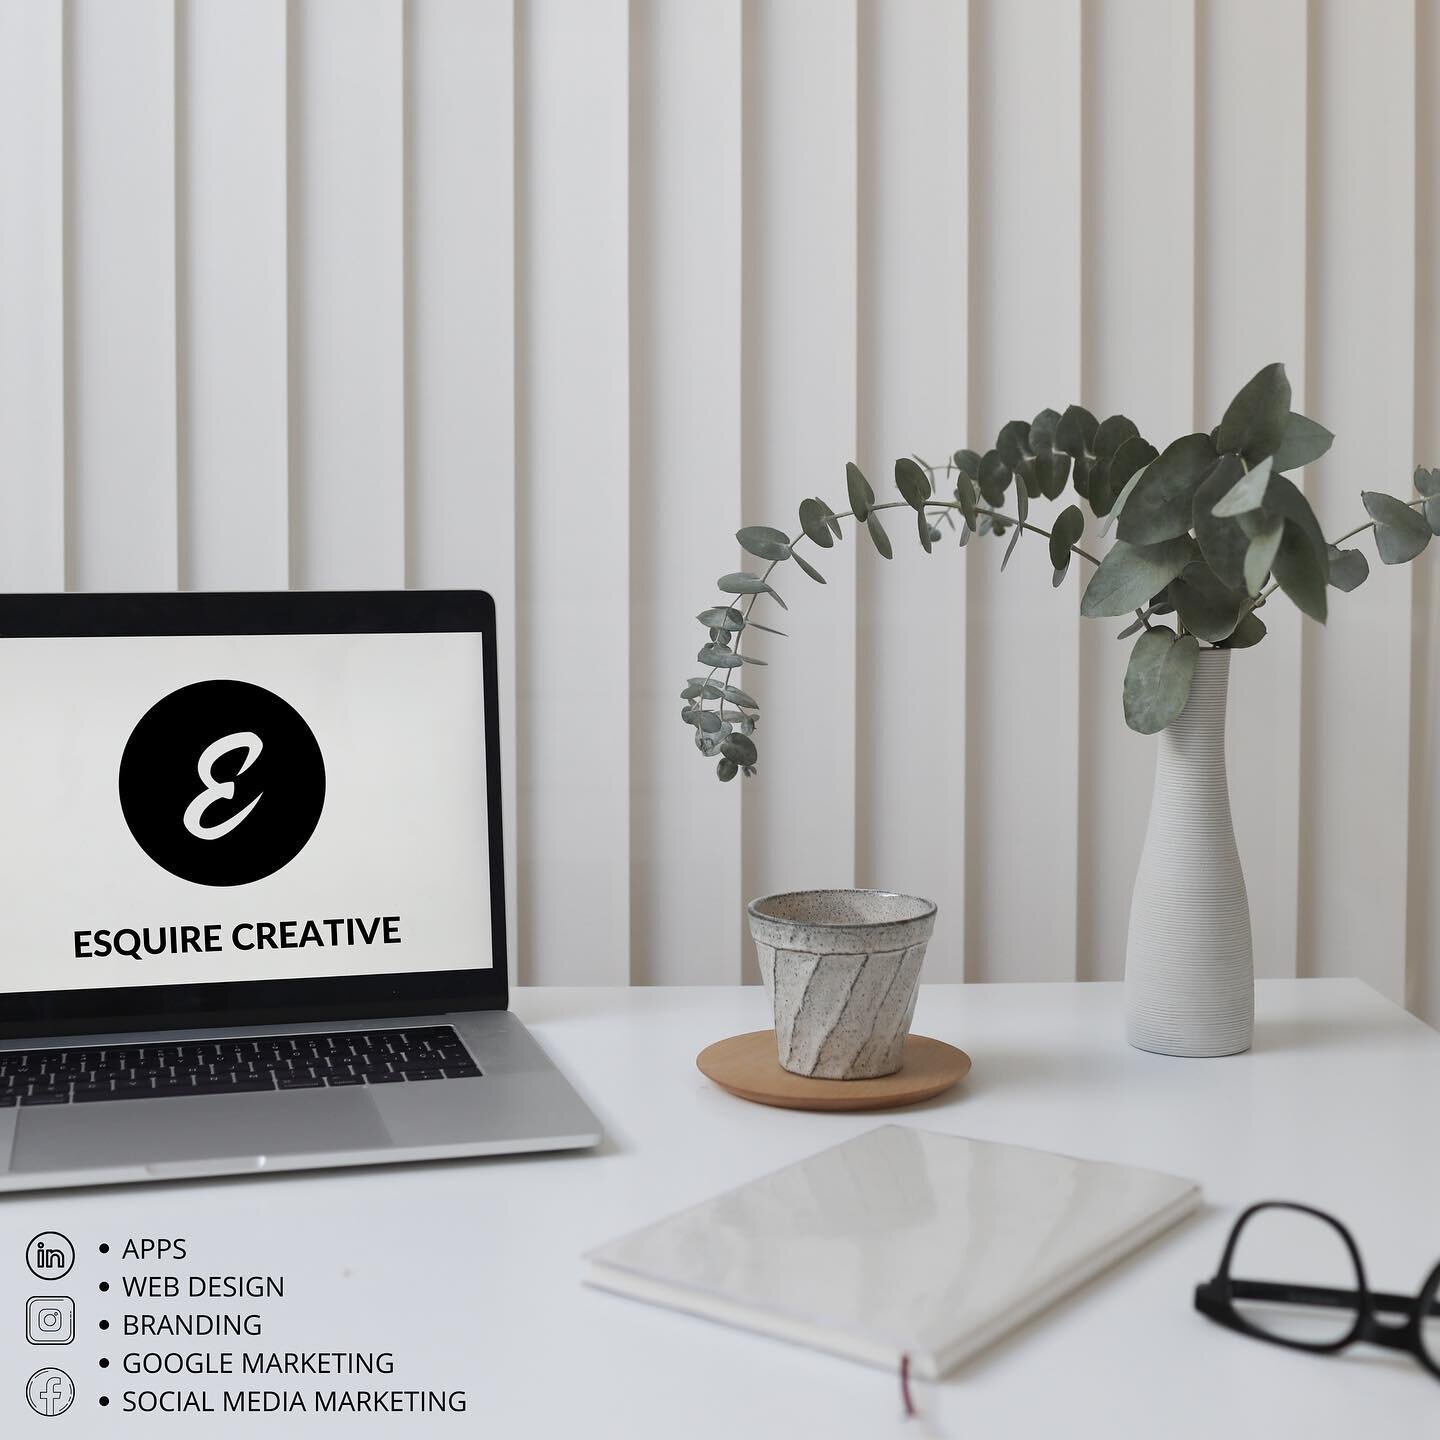 We here with you for the long haul....

Contact Us Today for all your marketing needs.

&mdash;
#esquirecreative #webdesign #marketing #marketingservices #brisbane #uk #cambridge #australia